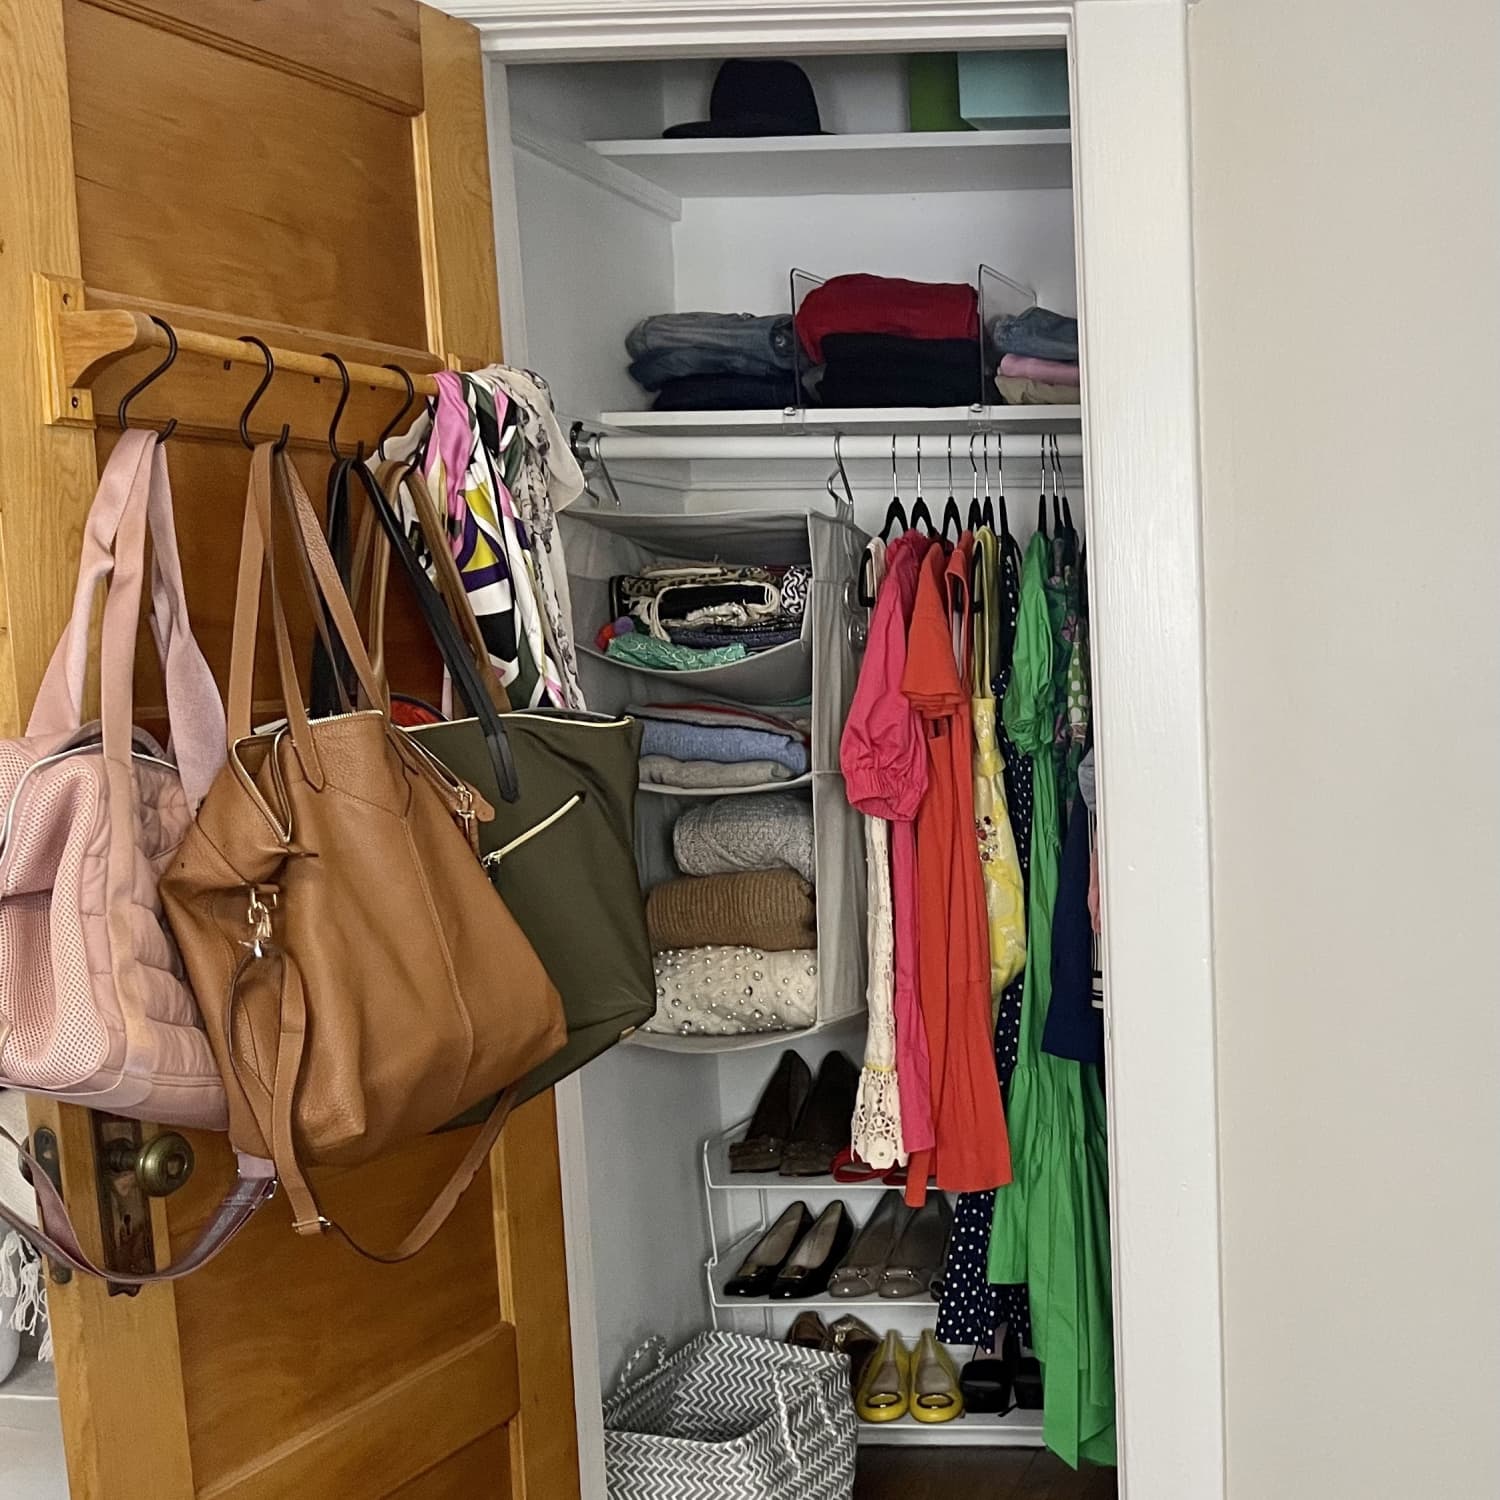 IKEA Fishing Gear Storage MAKEOVER: Shopping, Building, and Organizing 